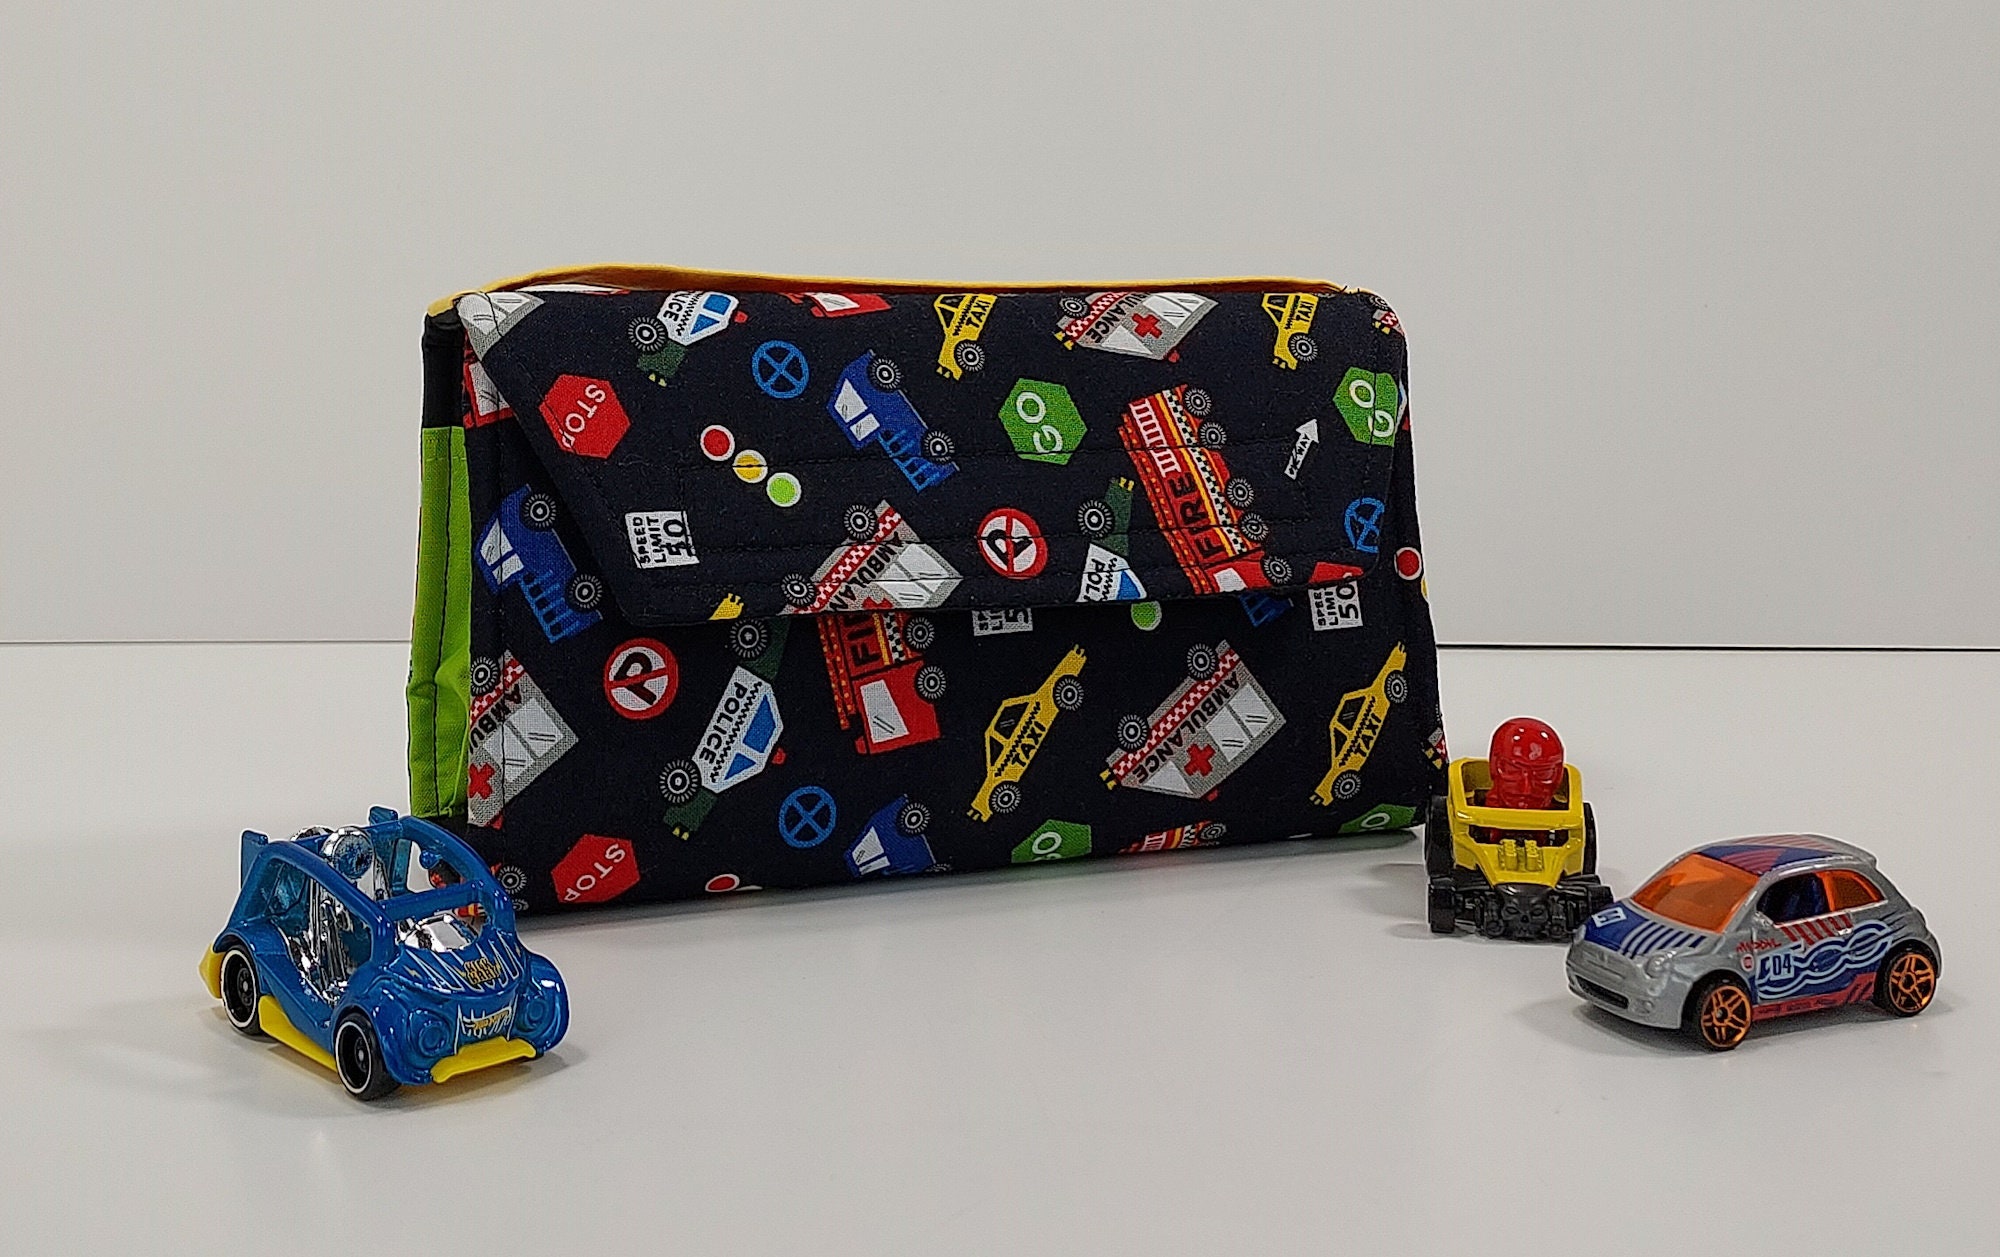 Hot Wheels Cases and Bags for carrying toy cars